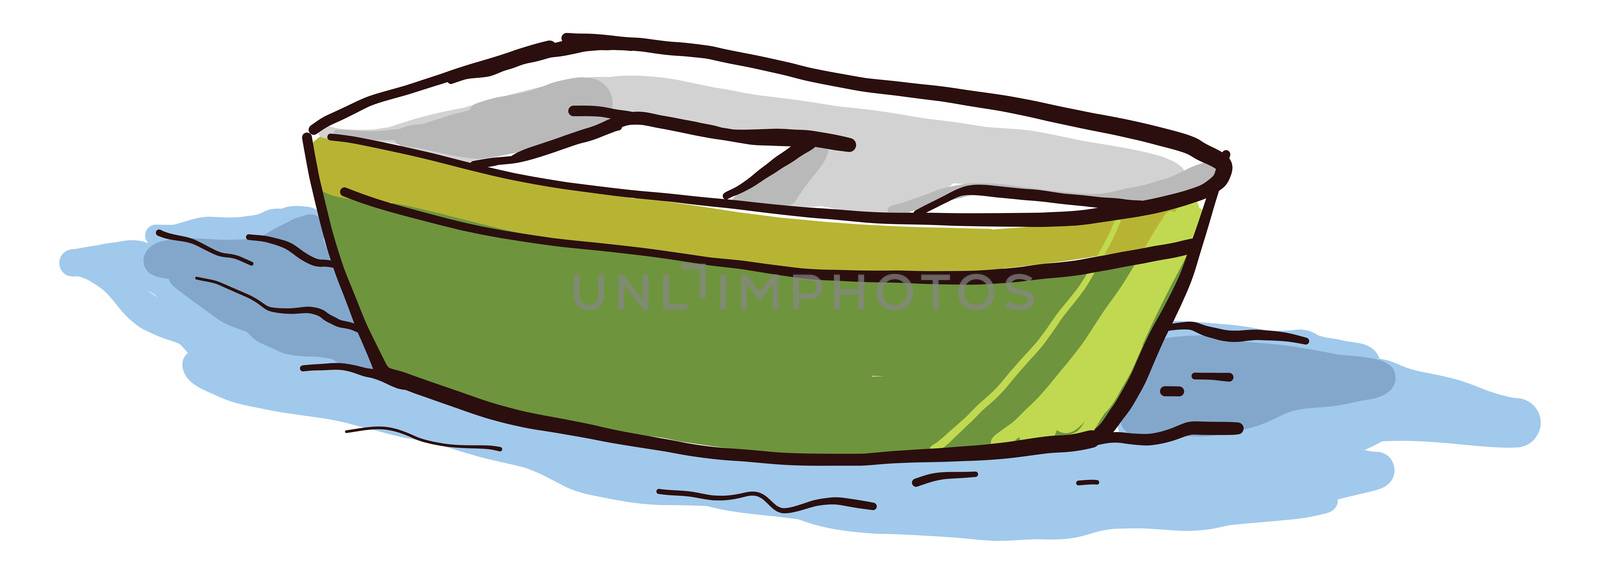 Green small boat , illustration, vector on white background by Morphart